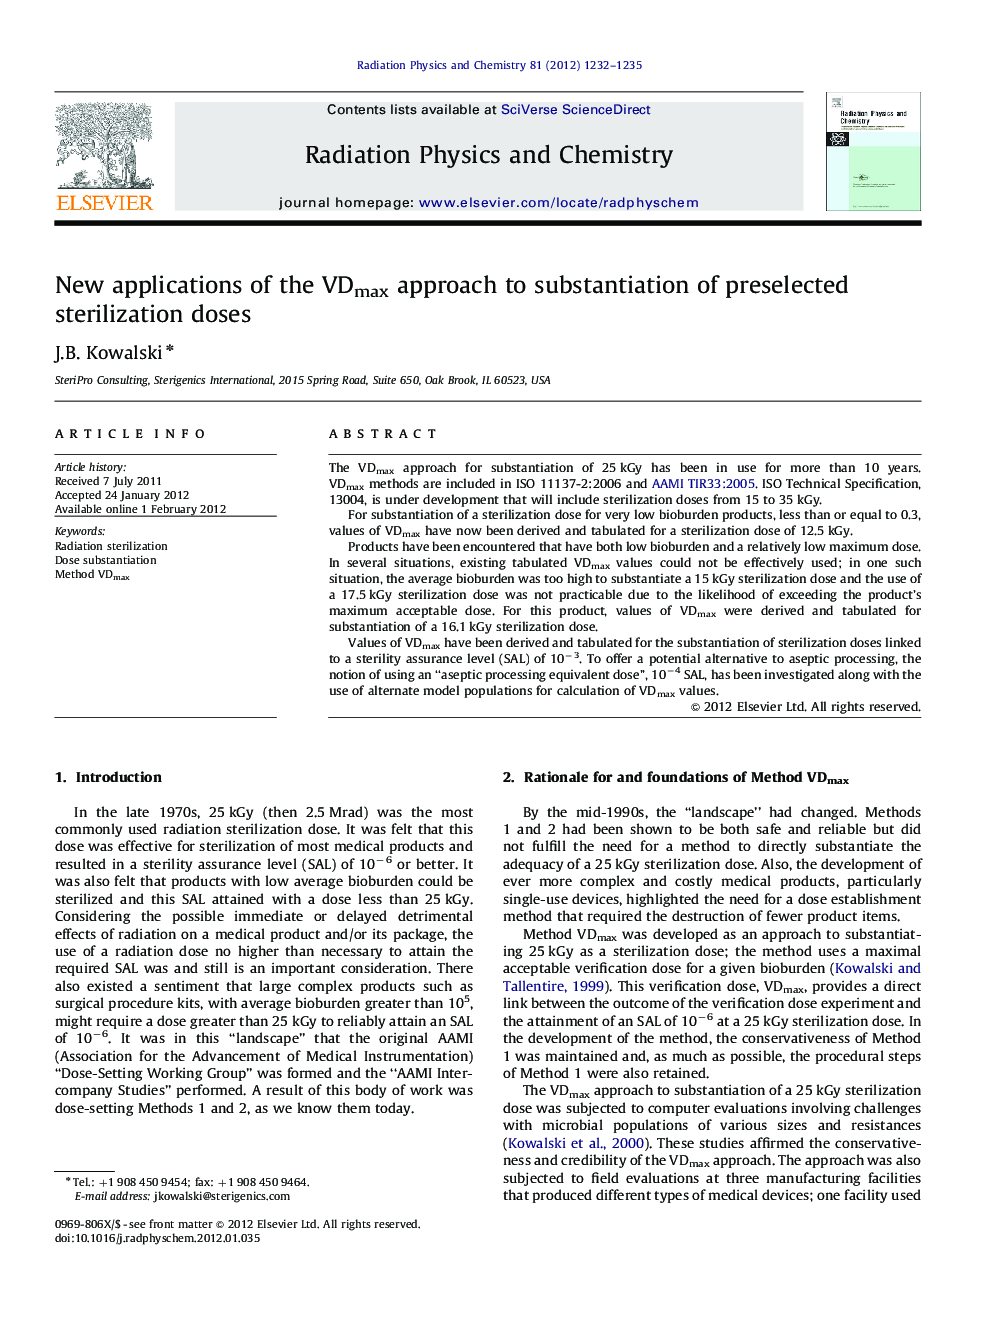 New applications of the VDmax approach to substantiation of preselected sterilization doses